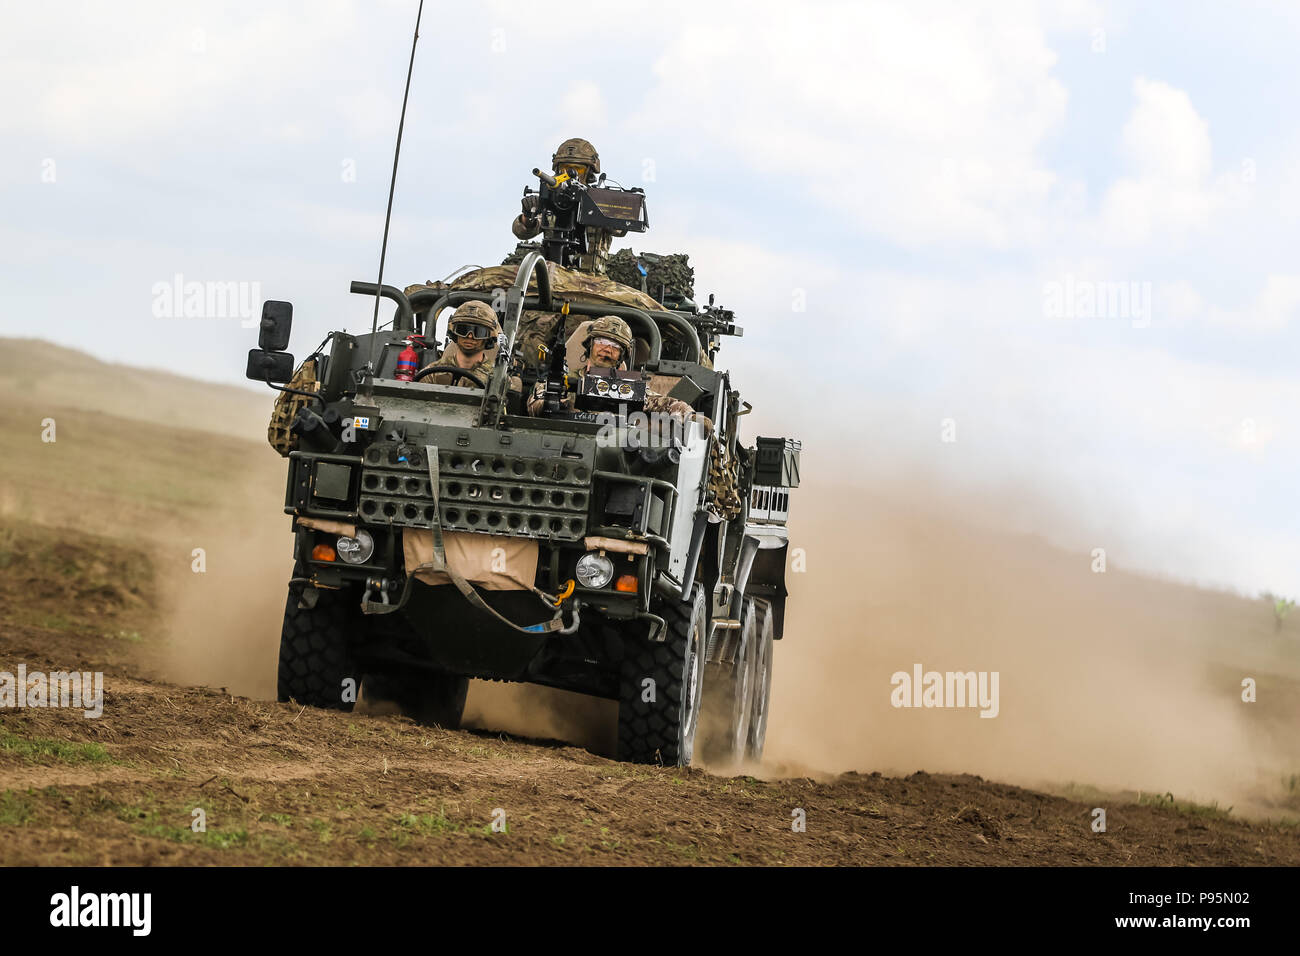 A Mobility Weapon-Mounted Installation Kit “Jackal” with the U.K. army 1st The Queen's Dragoon Guards moves to secure an area during the polish 15th Mechanized Brigade's Tank Day celebration with the Battle Group Poland at Orzysz, Poland on July 14, 2018. Battle Group Poland is a unique, multinational coalition of U.S., U.K., Croatian and Romanian Soldiers who serve with the Polish 15th Mechanized Brigade as a deterrence force in support of NATO’s Enhanced Forward Presence. (U.S. Army photo by Spc. Hubert D. Delany III /22nd Mobile Public Affairs Detachment) Stock Photo